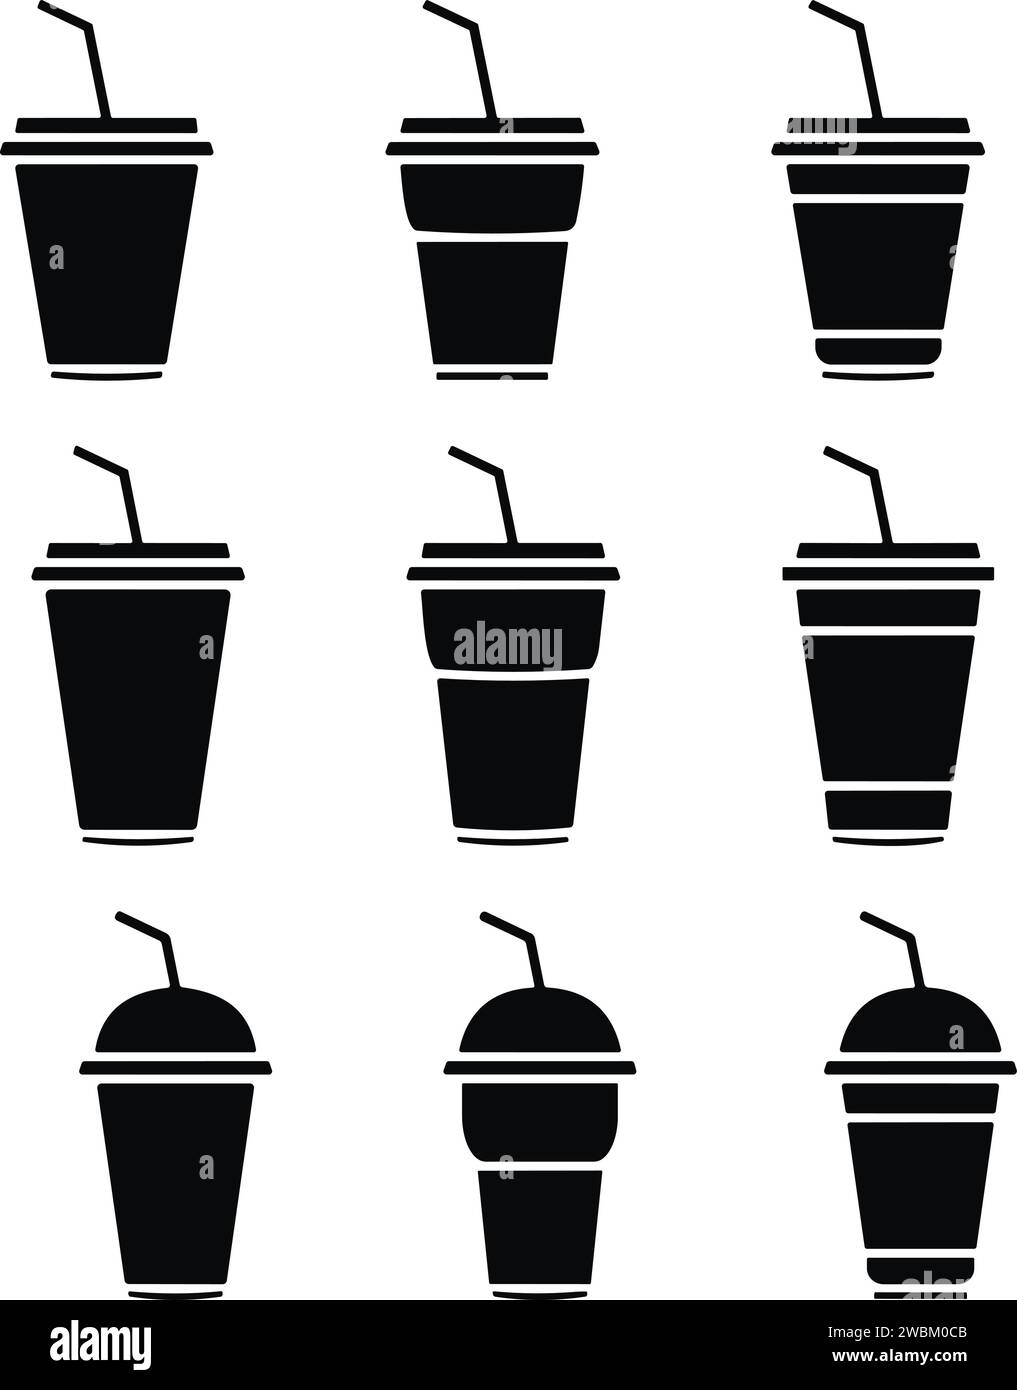 Disposable plastic coffee or tea cup with straw icon vector set. cold drink glasses collection in flat style. Stock Vector